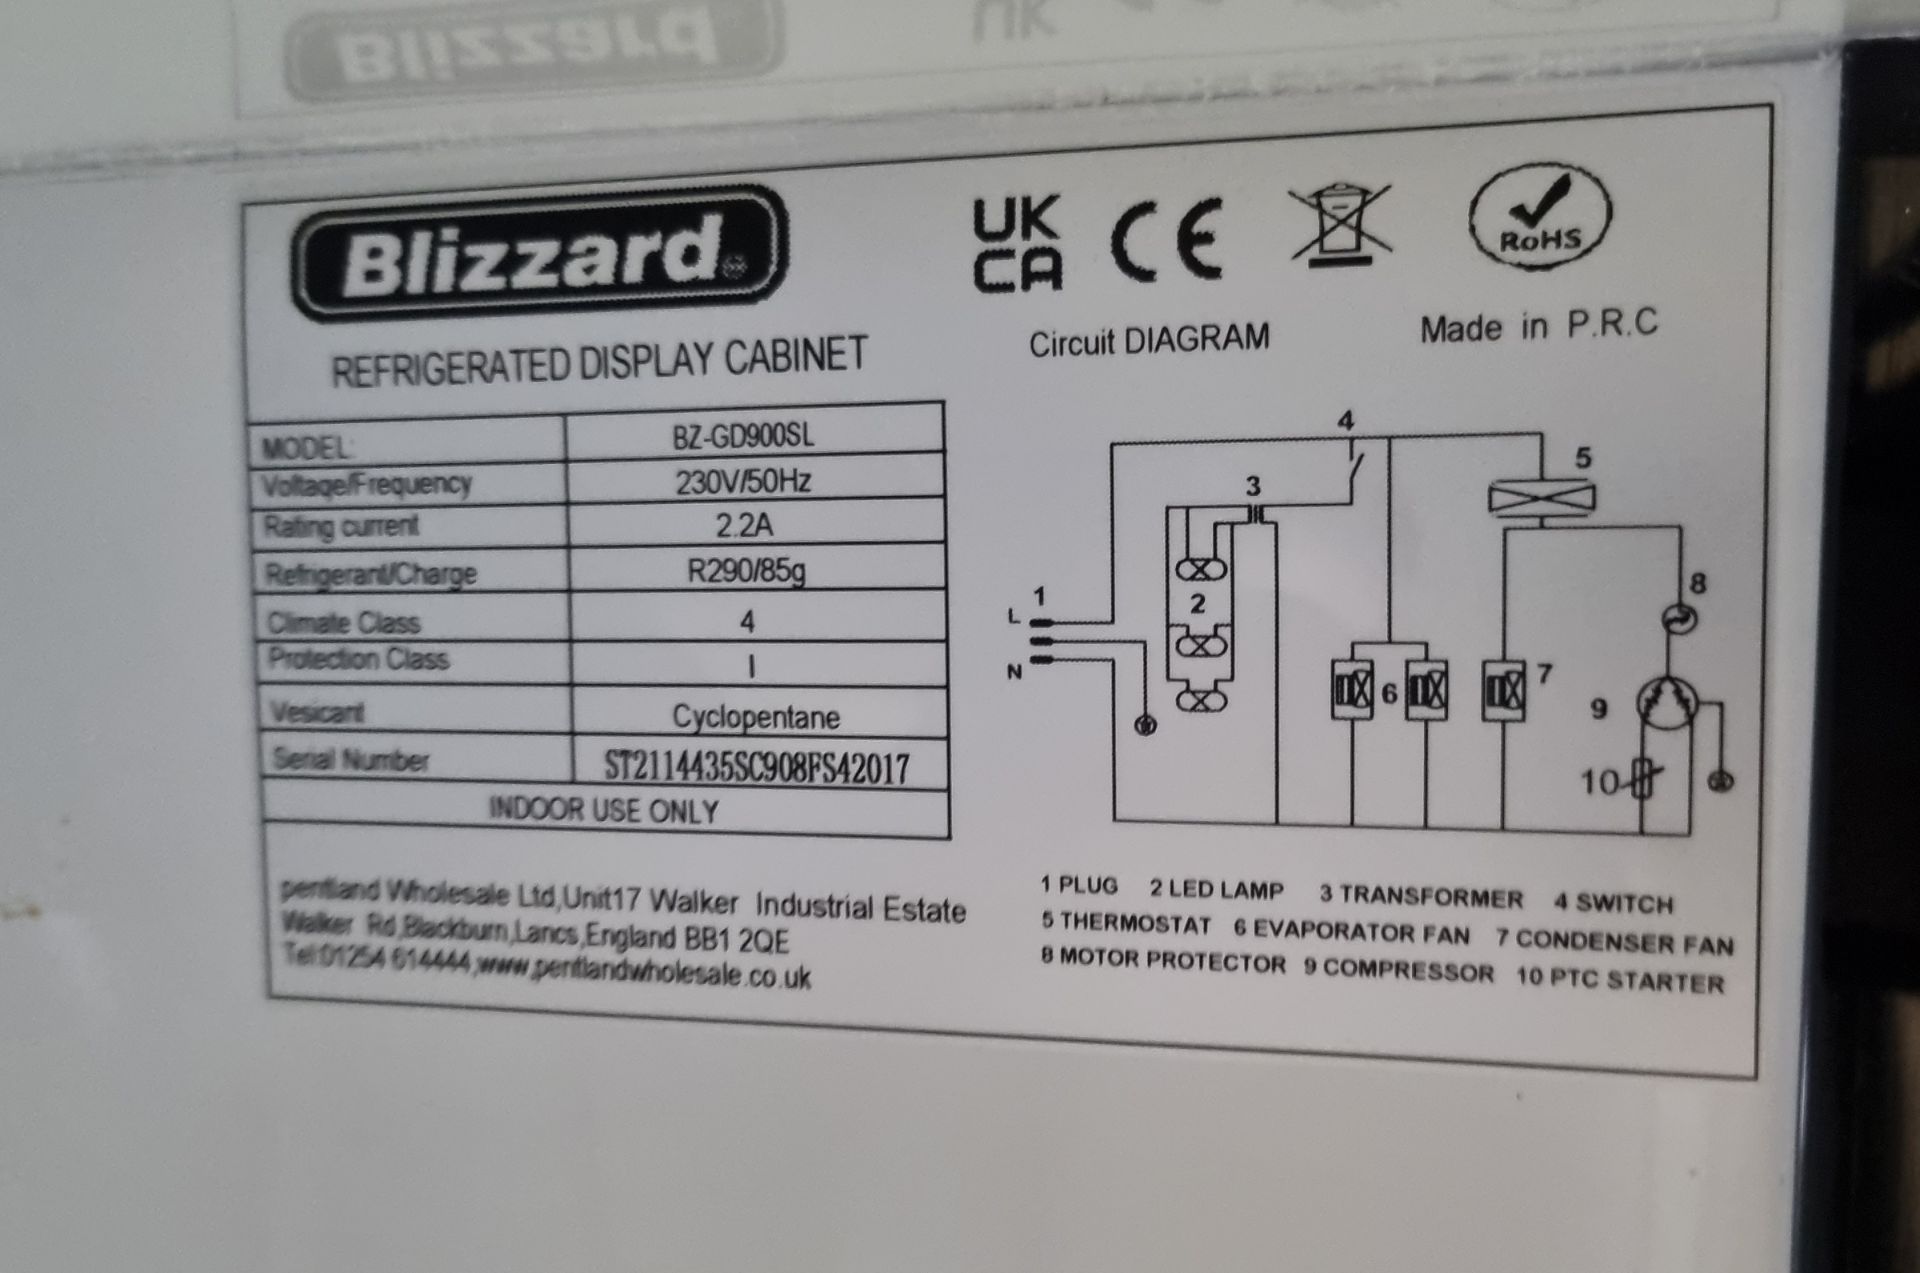 Blizzard BZ-GD900SL refrigerated display cabinet - W 1320 x D 700 x H 2000mm - Image 4 of 6